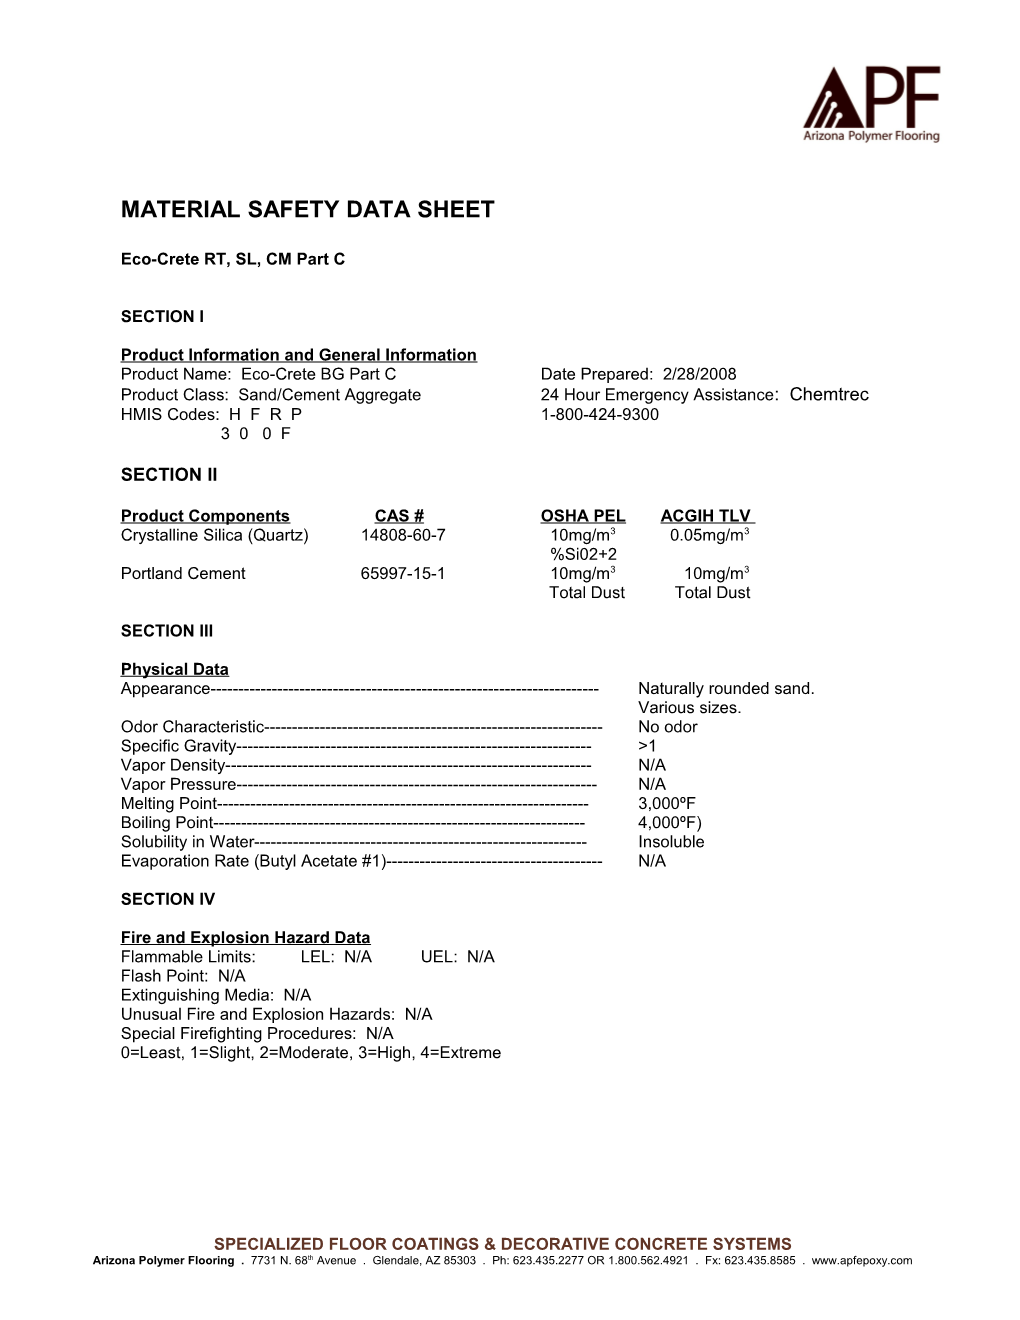 Material Safety Data Sheet s105